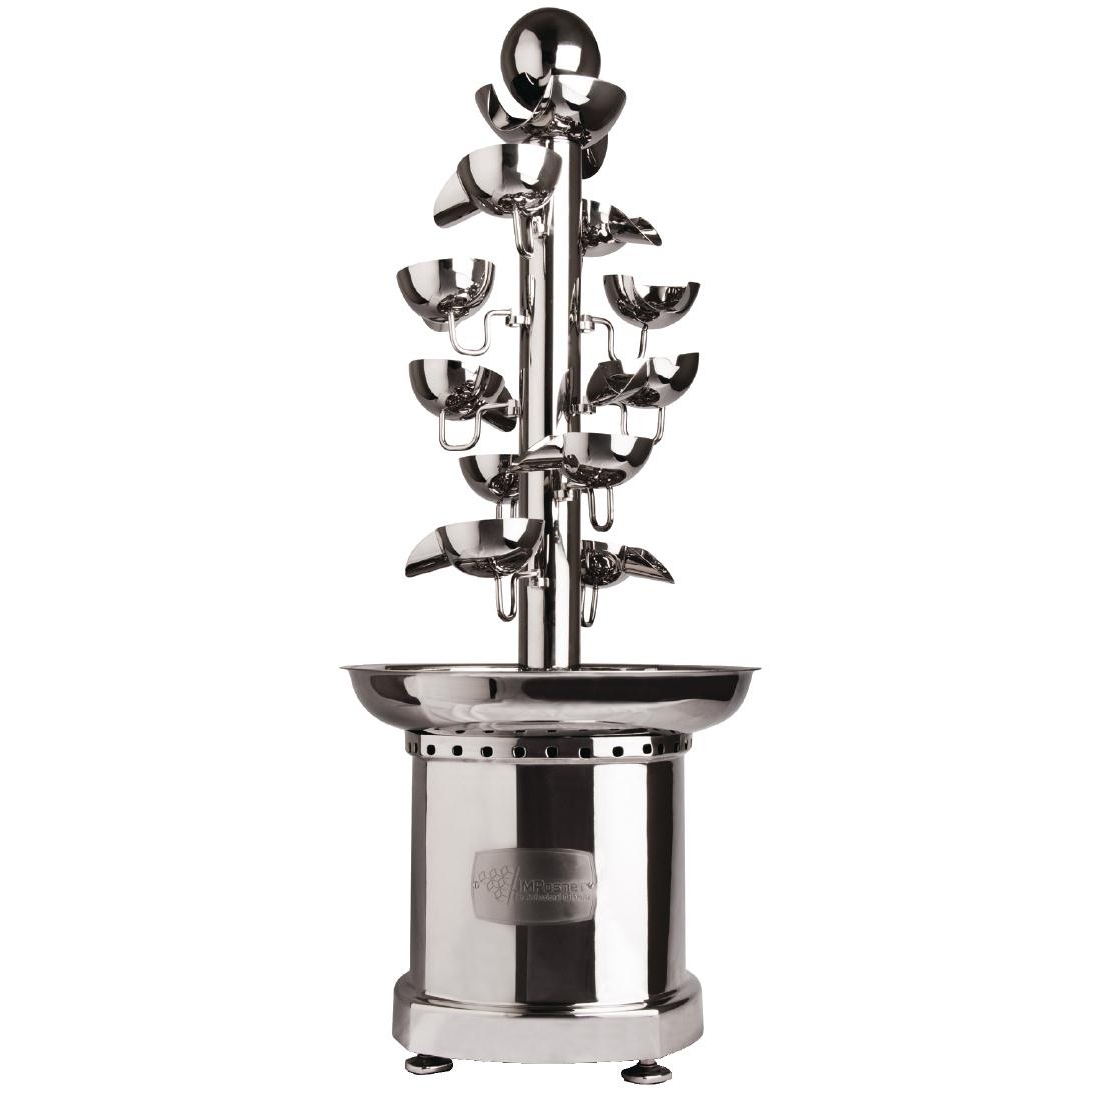 JM Posner Chocolate Fountain With Cascade Waterfall SQ2